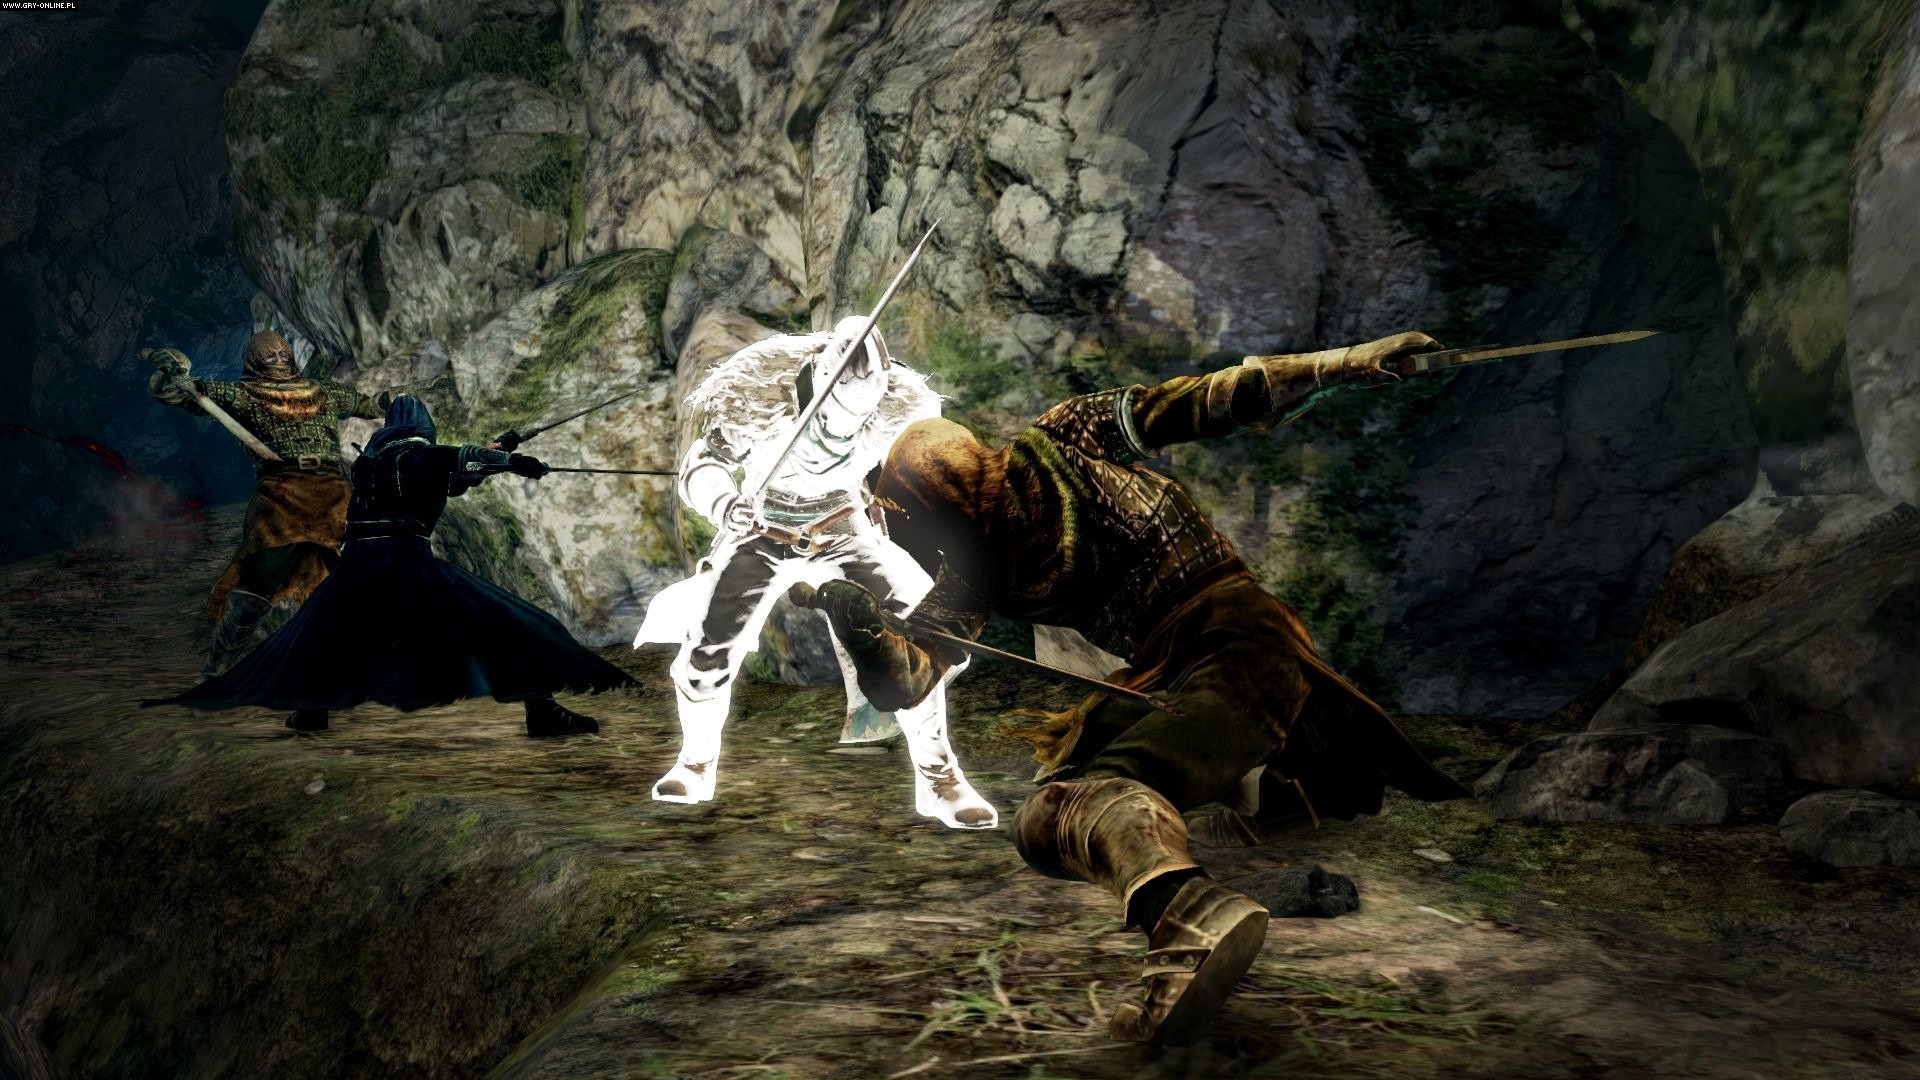 How to Get Dark Souls II For Free For PC! + Gameplay! 